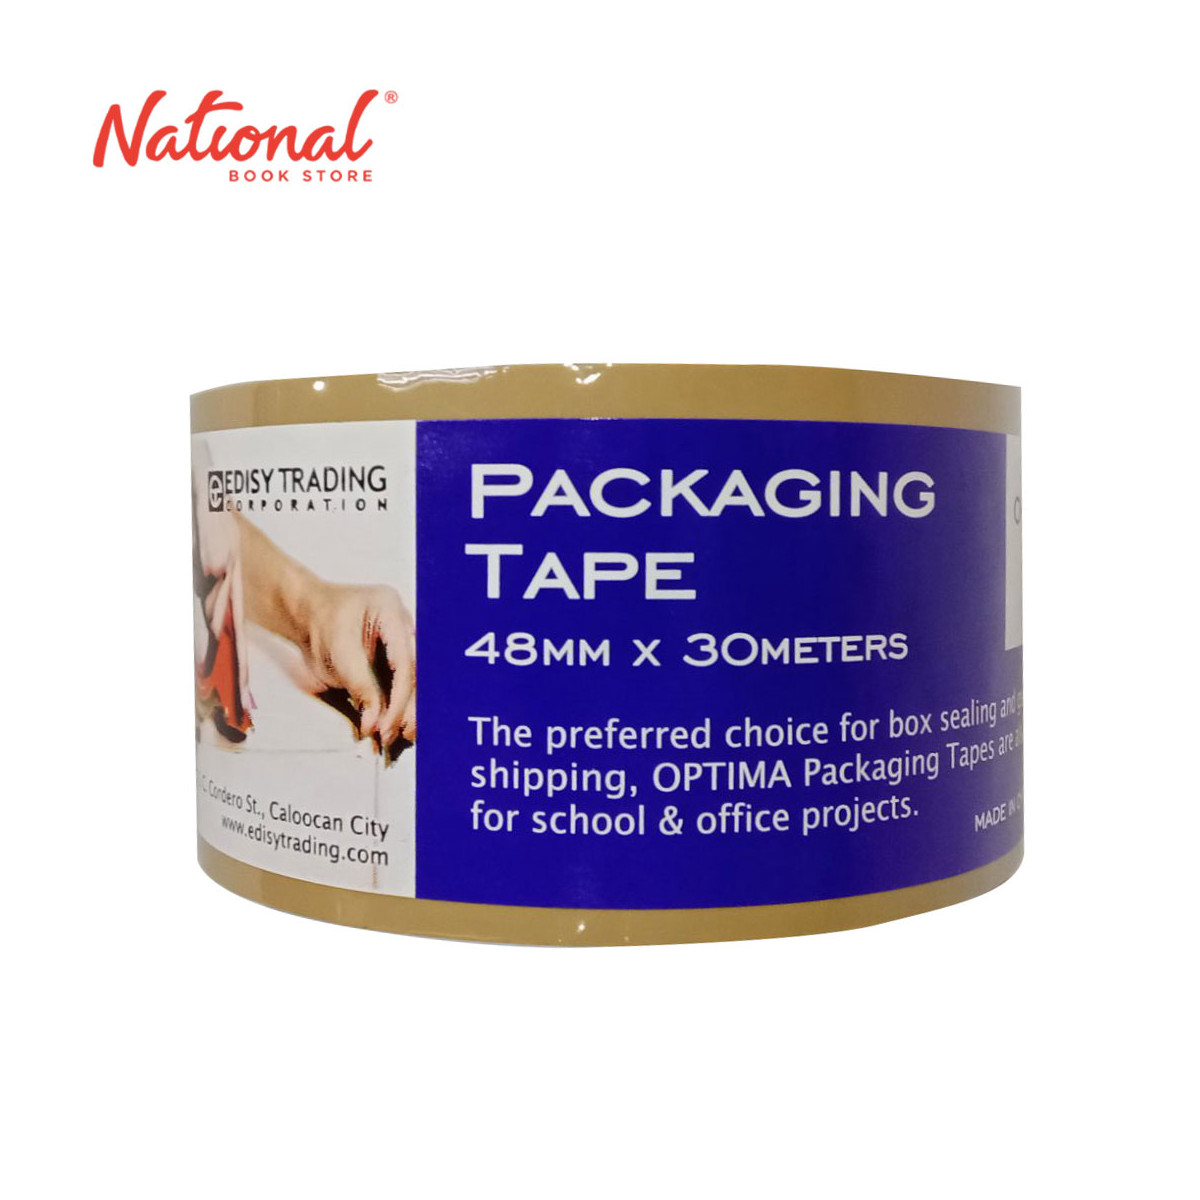 Optima Packaging Tape Tan 48mmx30m - School & Office Supplies - Tapes & Adhesives